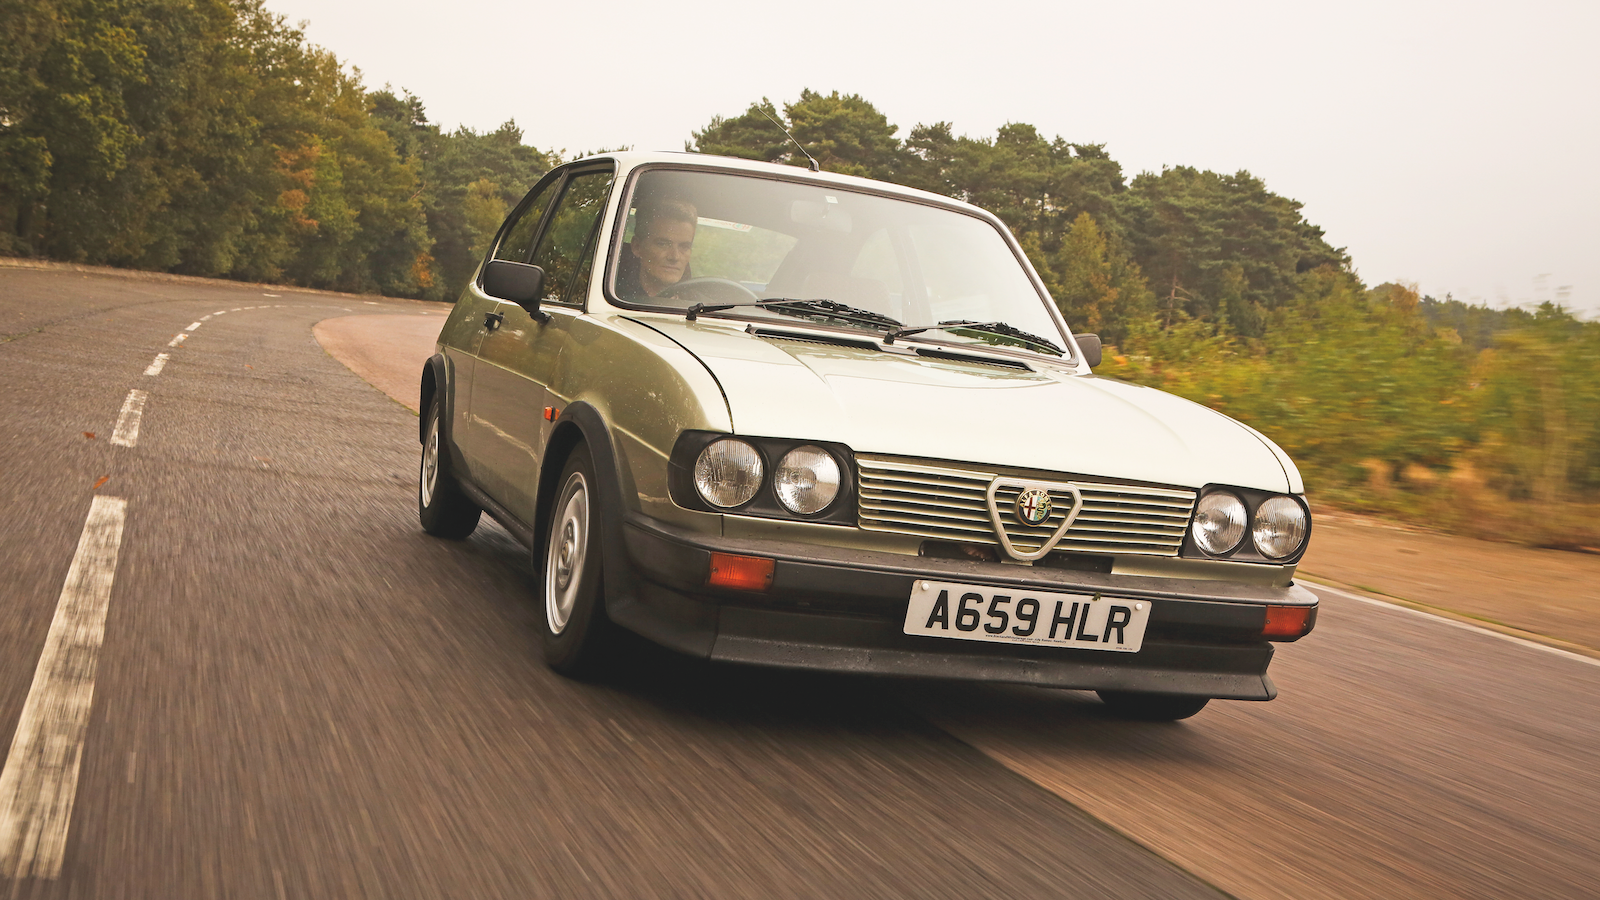 Best-selling classics that are now nearly extinct